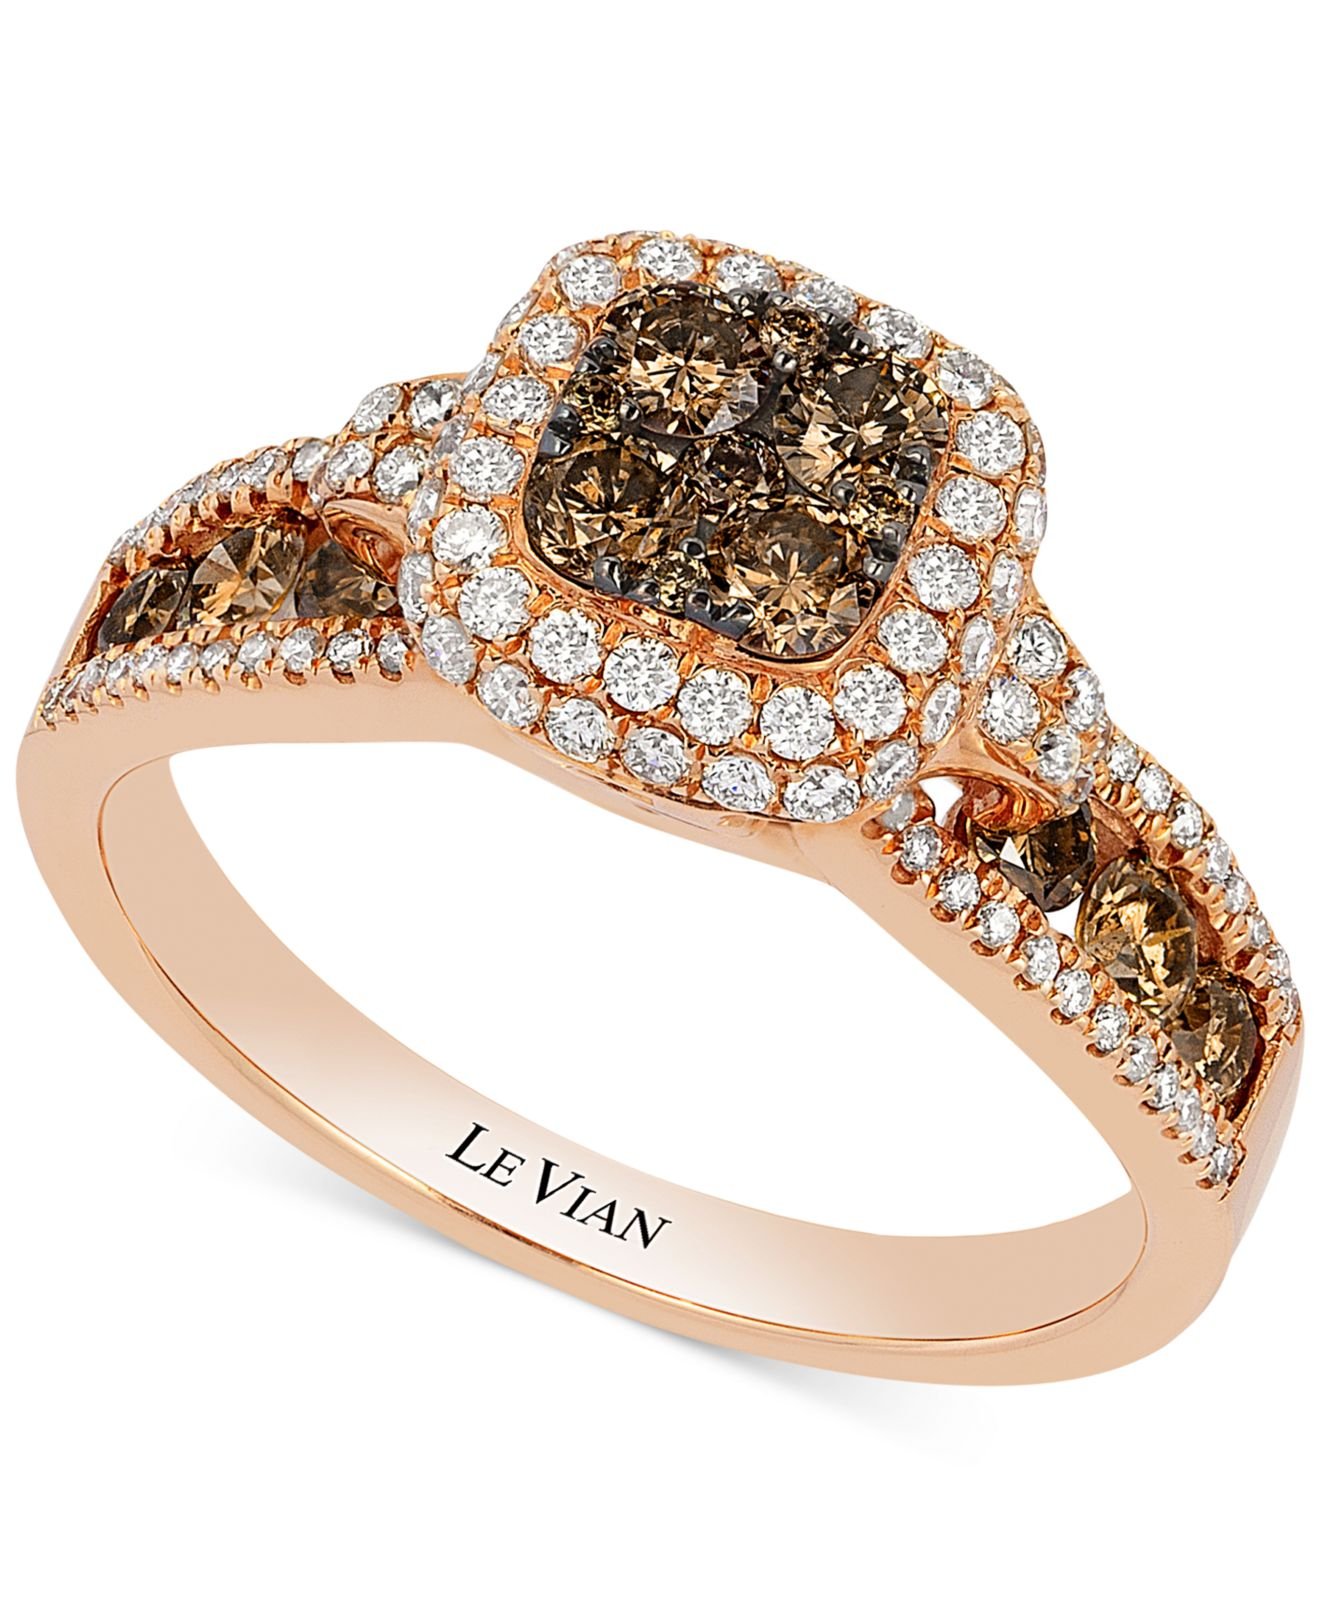 Le vian Chocolate And White Diamond Ring In 14k Rose Gold (1 Ct. T.w.) in Brown Lyst